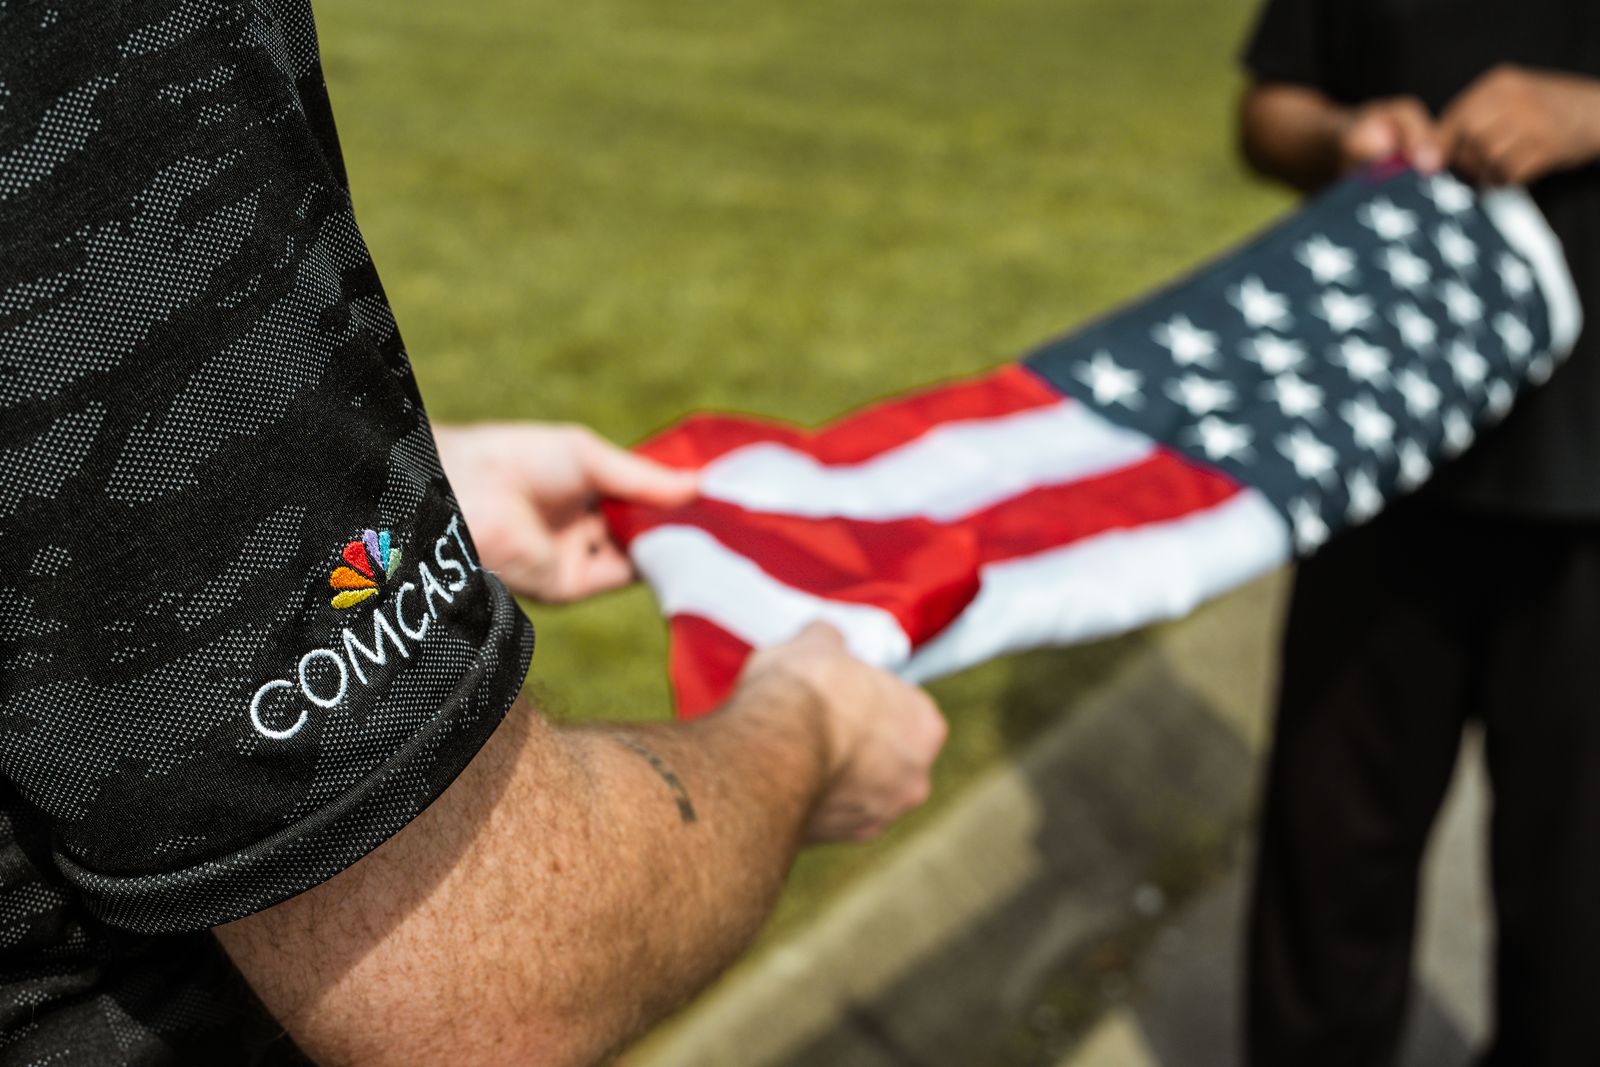 Comcast Military Veterans Launch Flag Replacement Program in Tupelo